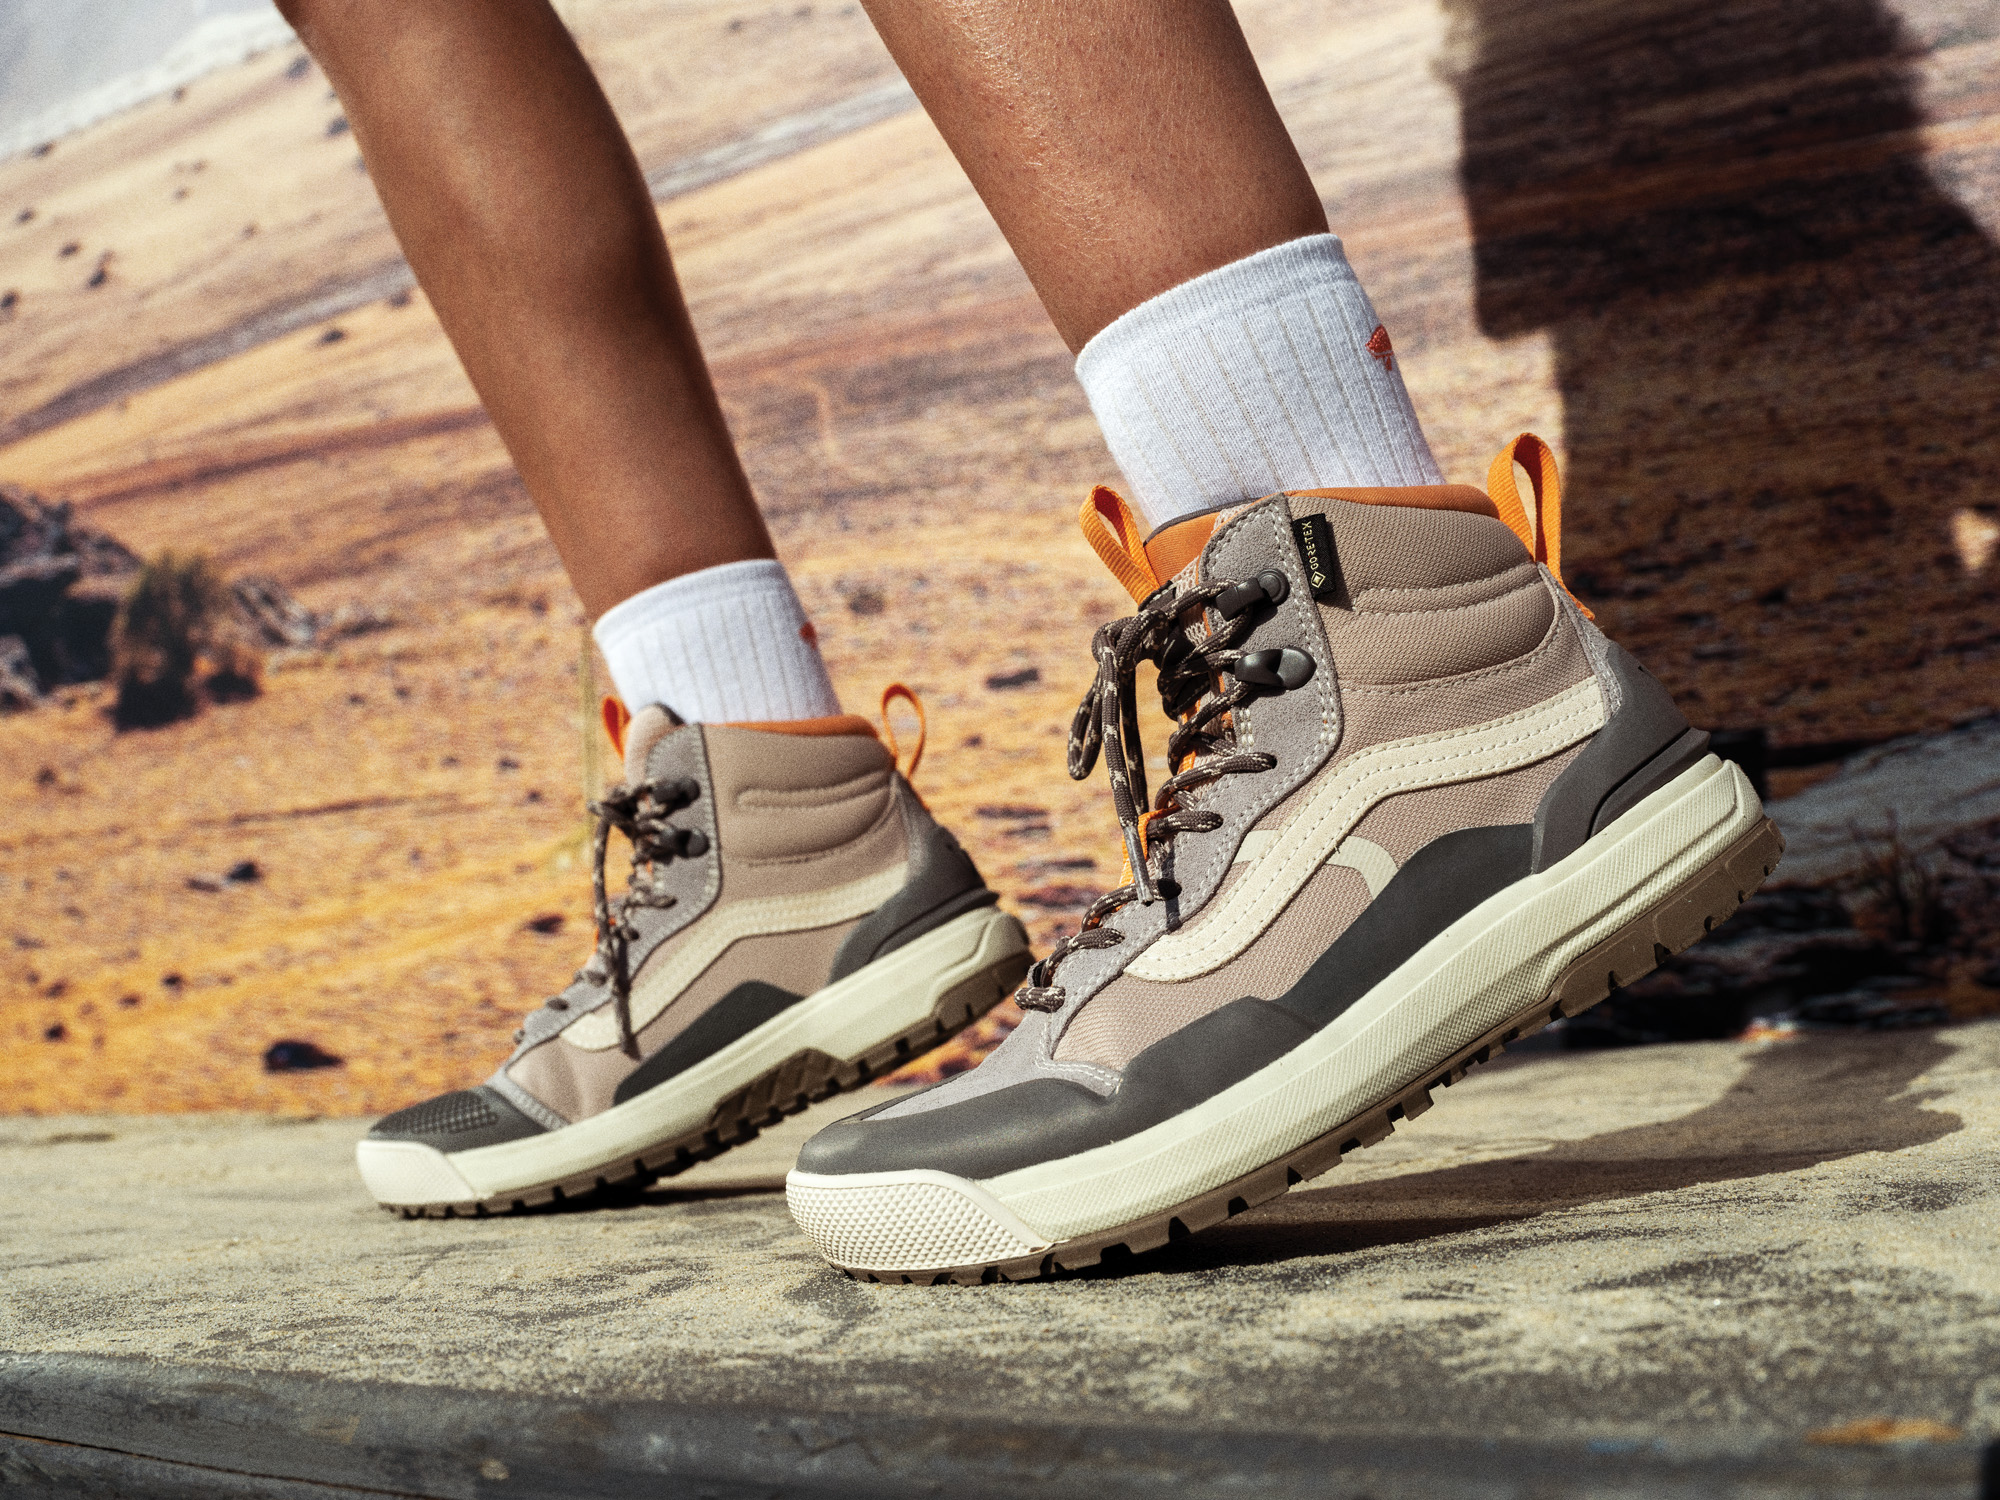 hiking boots: Introducing a warm-weather addition to the MTE - The Manual